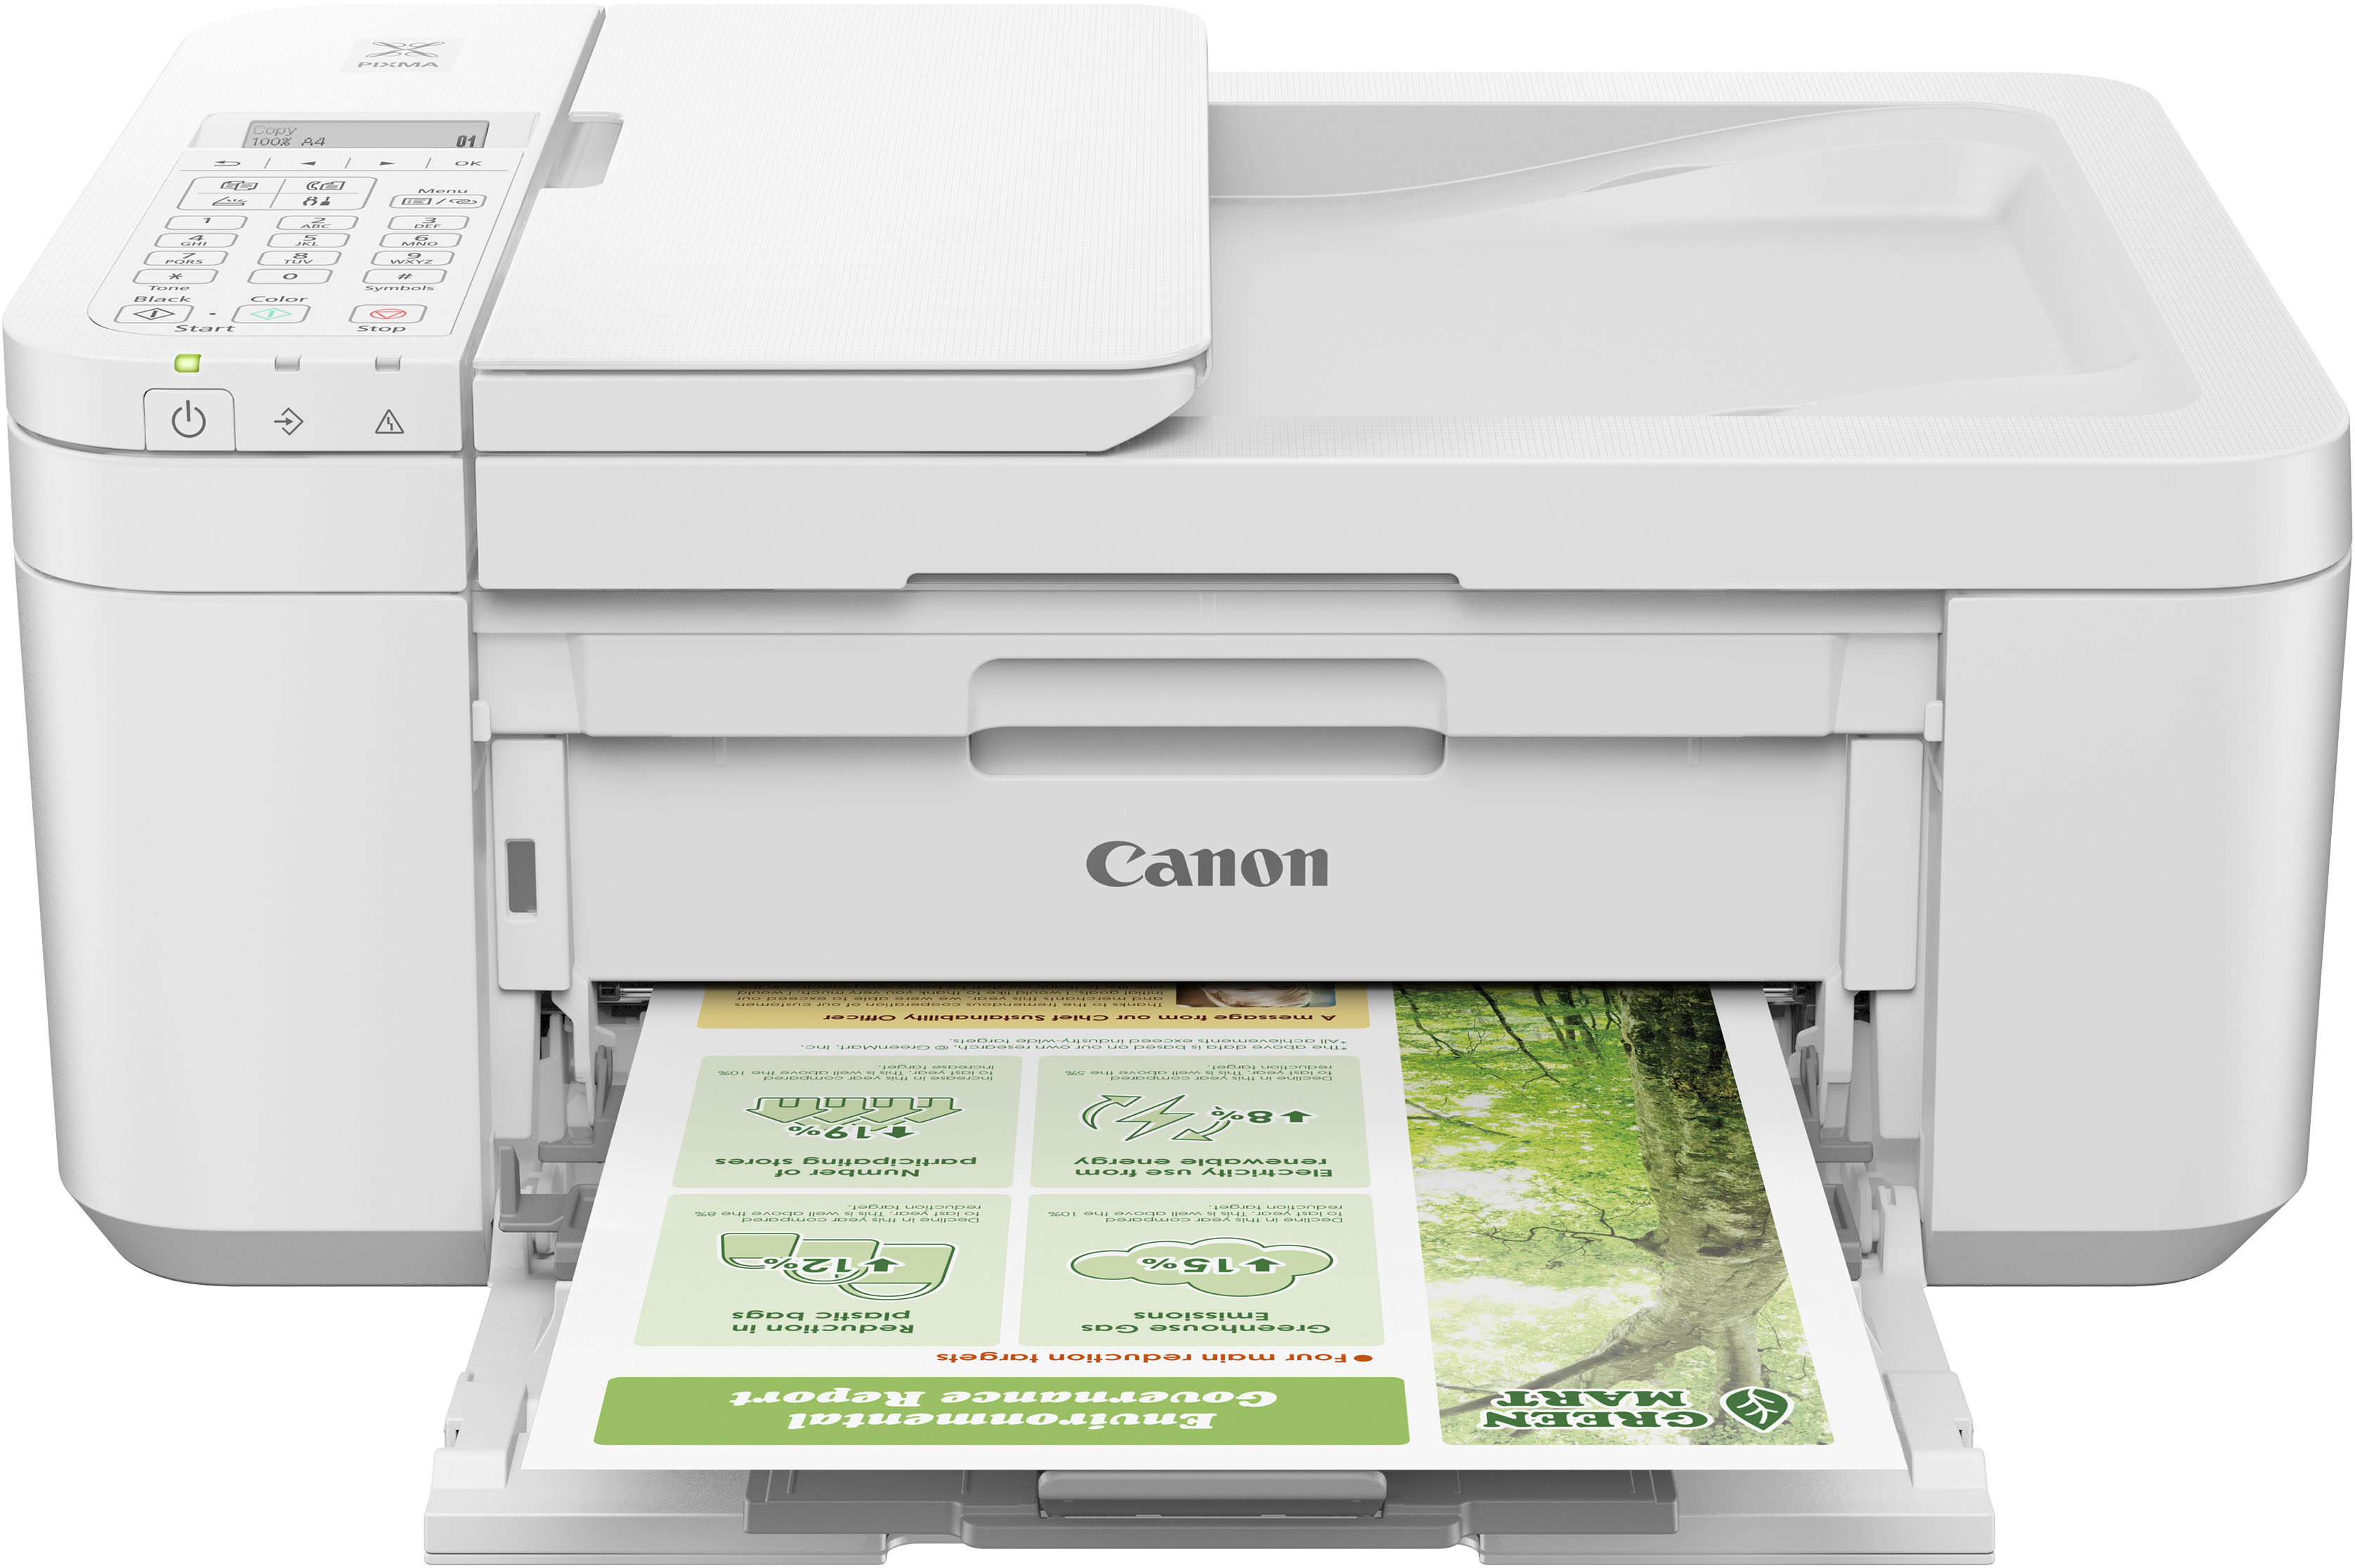 Canon PIXMA TS3450 All-In-One Wireless Printer, Wi-fi, Airprint - Inks  Included